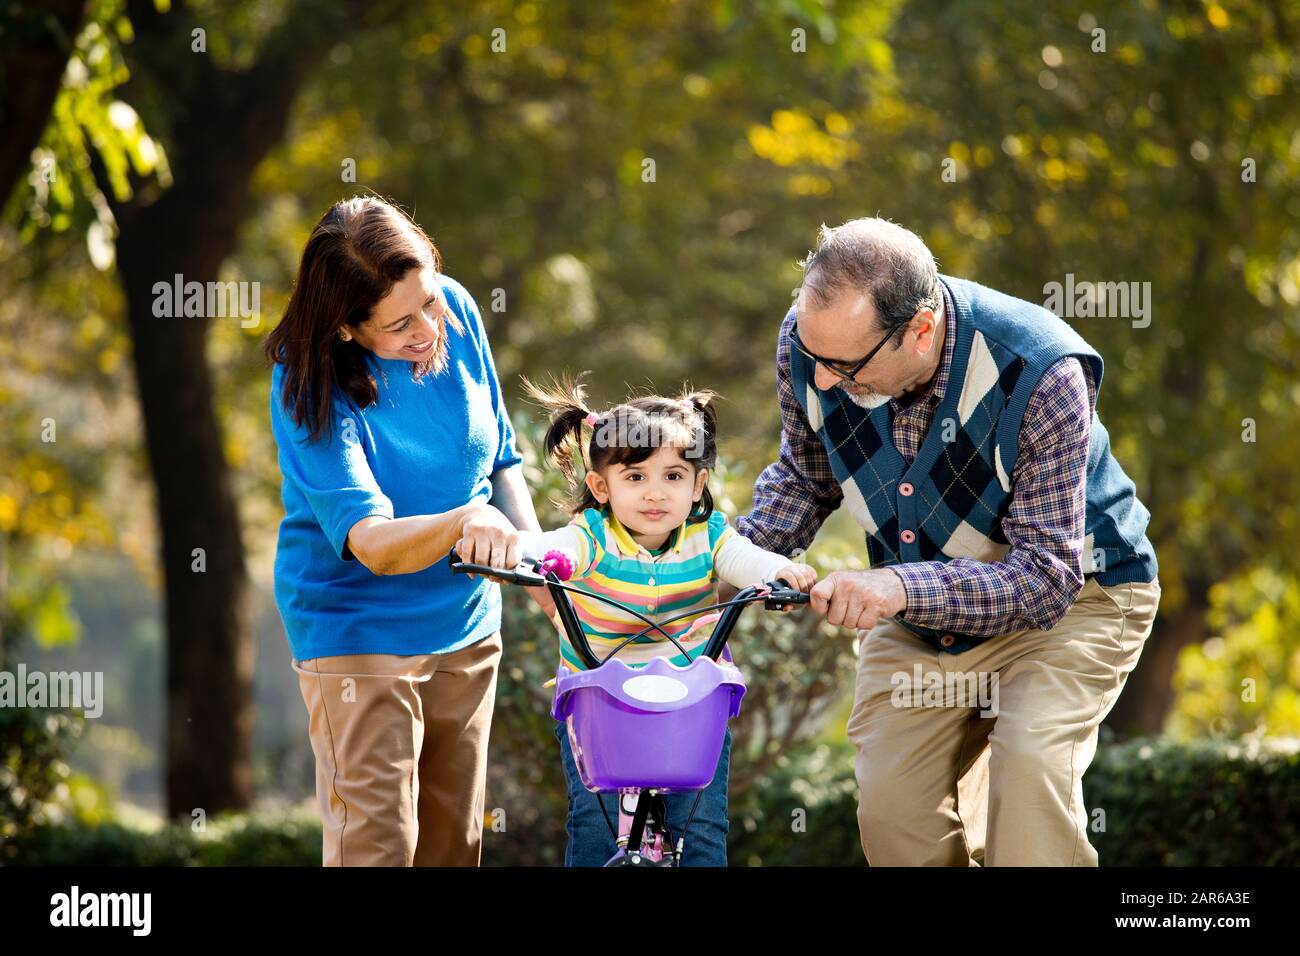 Grandparents with granddaughter learning to ride bicycle Stock Photo